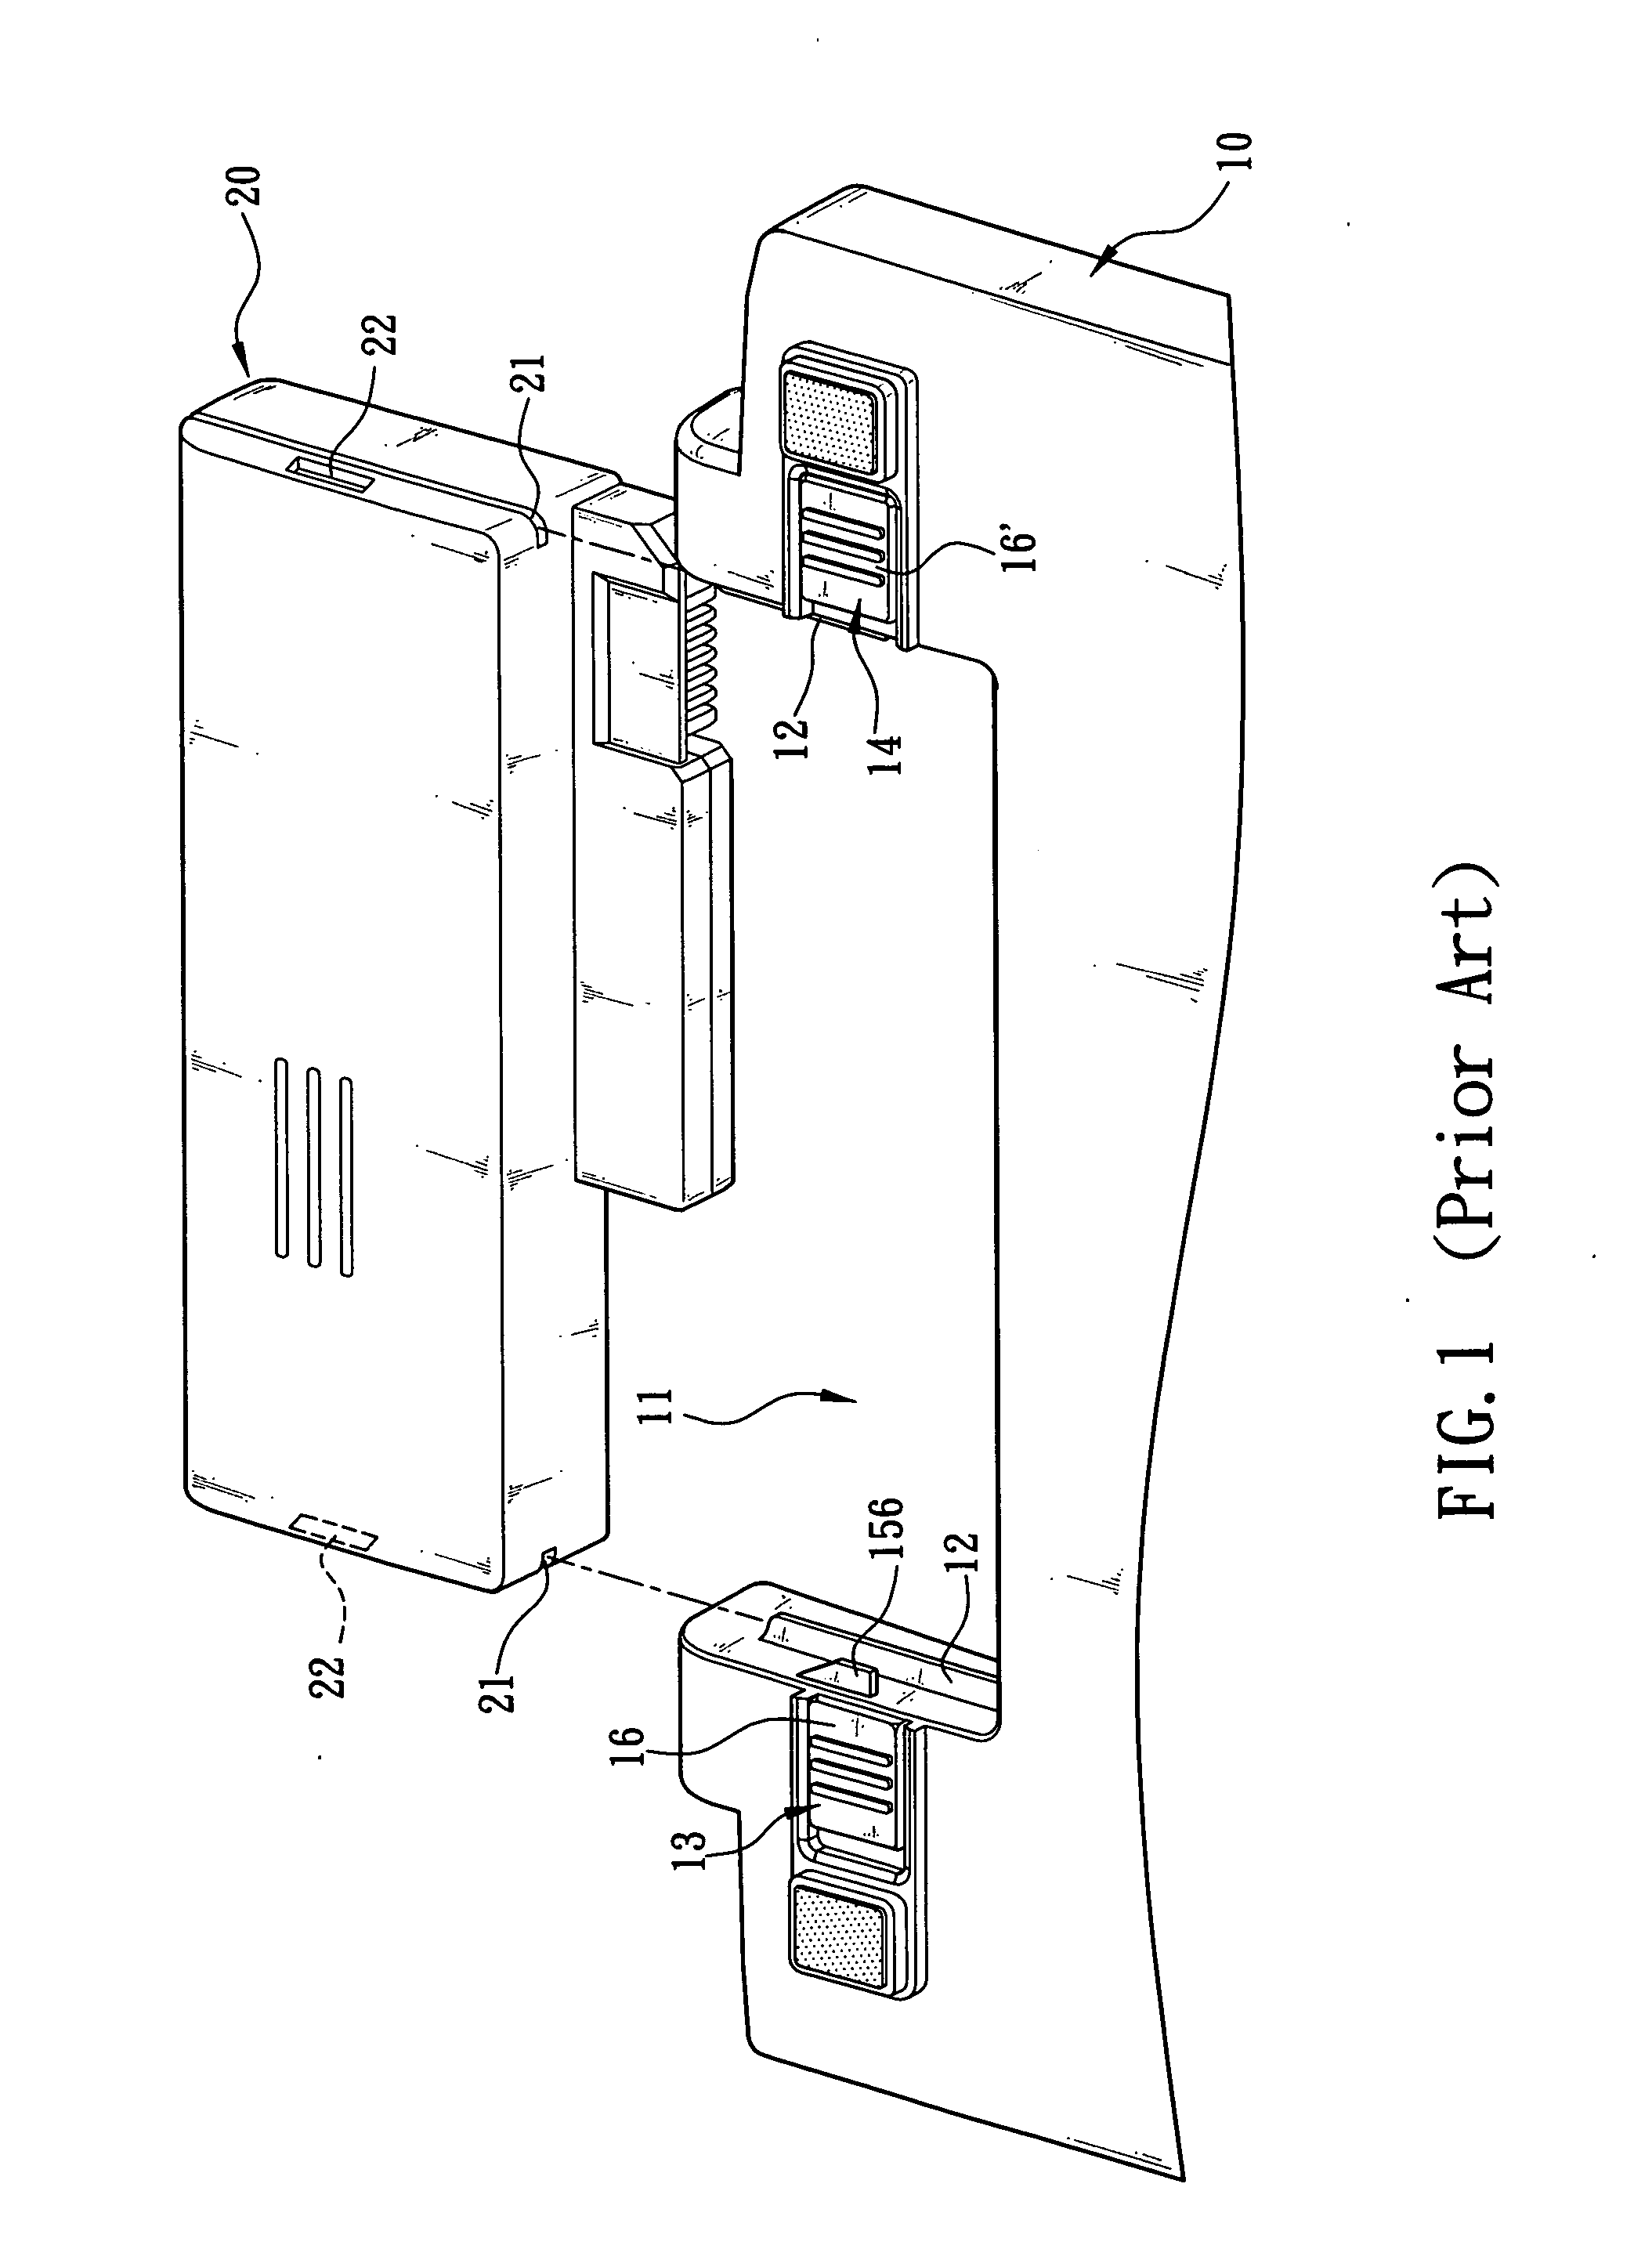 Module assembly for locking and unlocking a battery of an electronic device